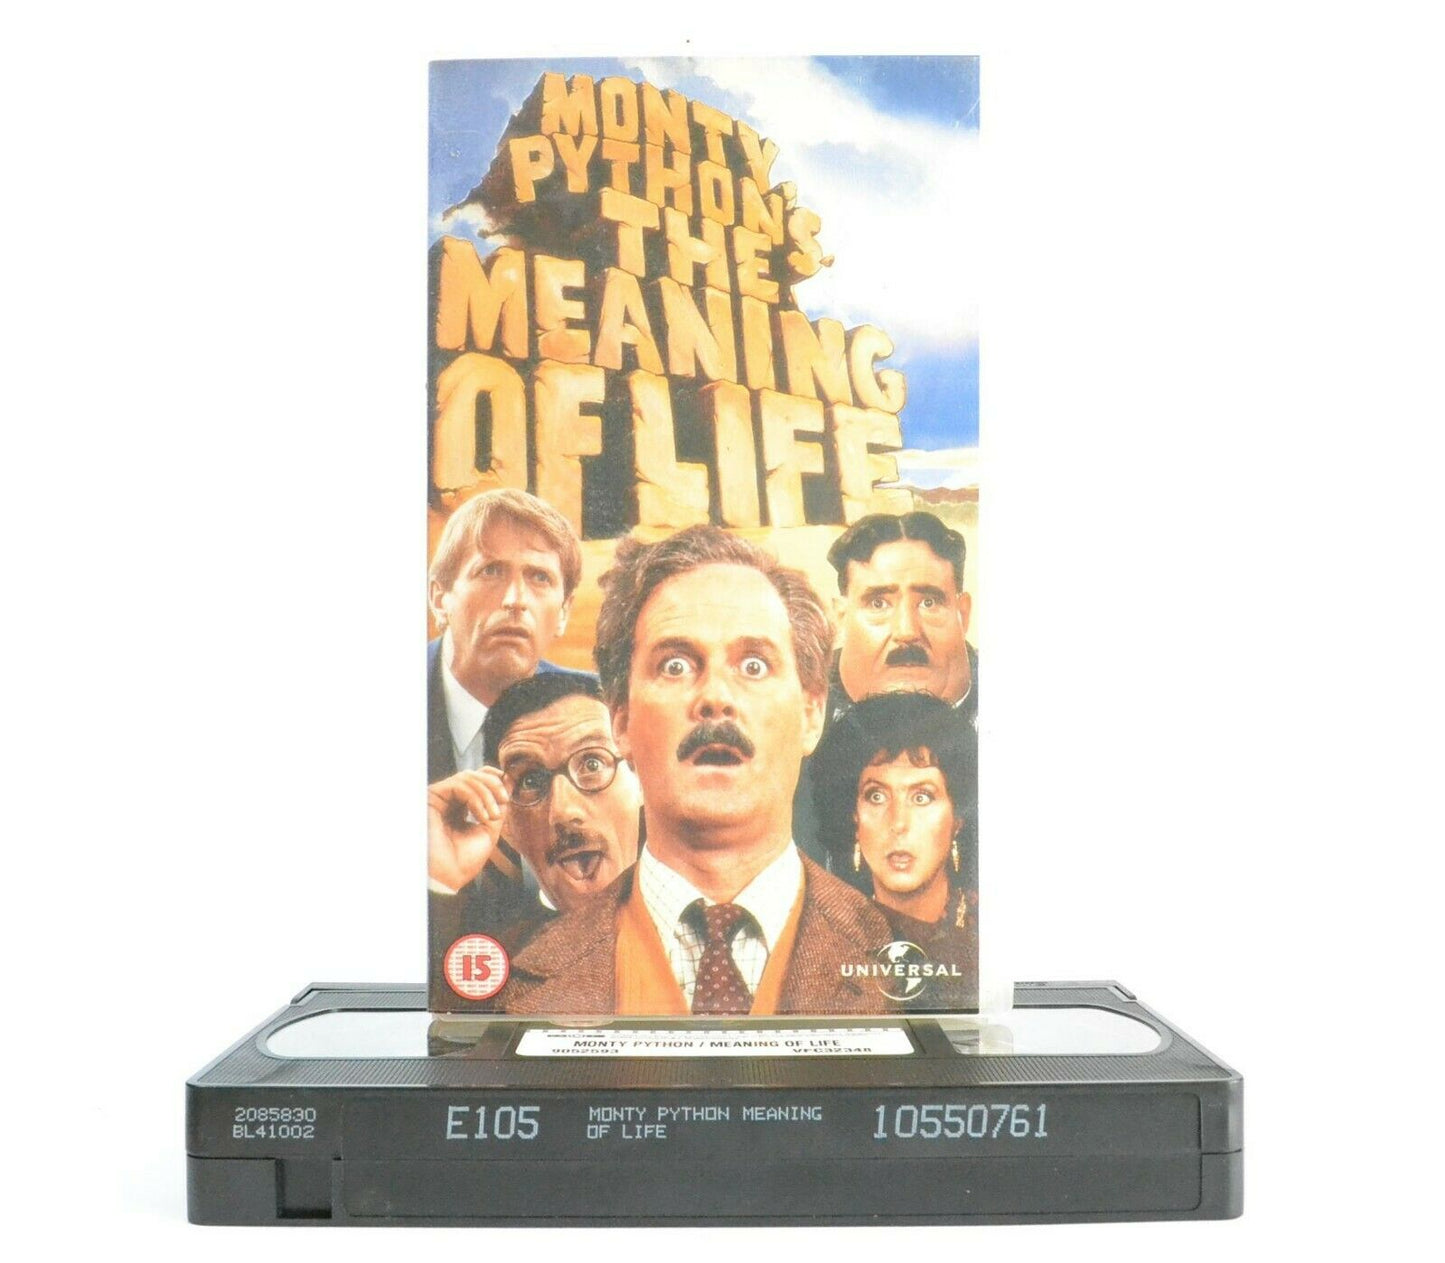 Monty Python's The Meaning Of Life: British Comedy Classic - J.Cleese - Pal VHS-